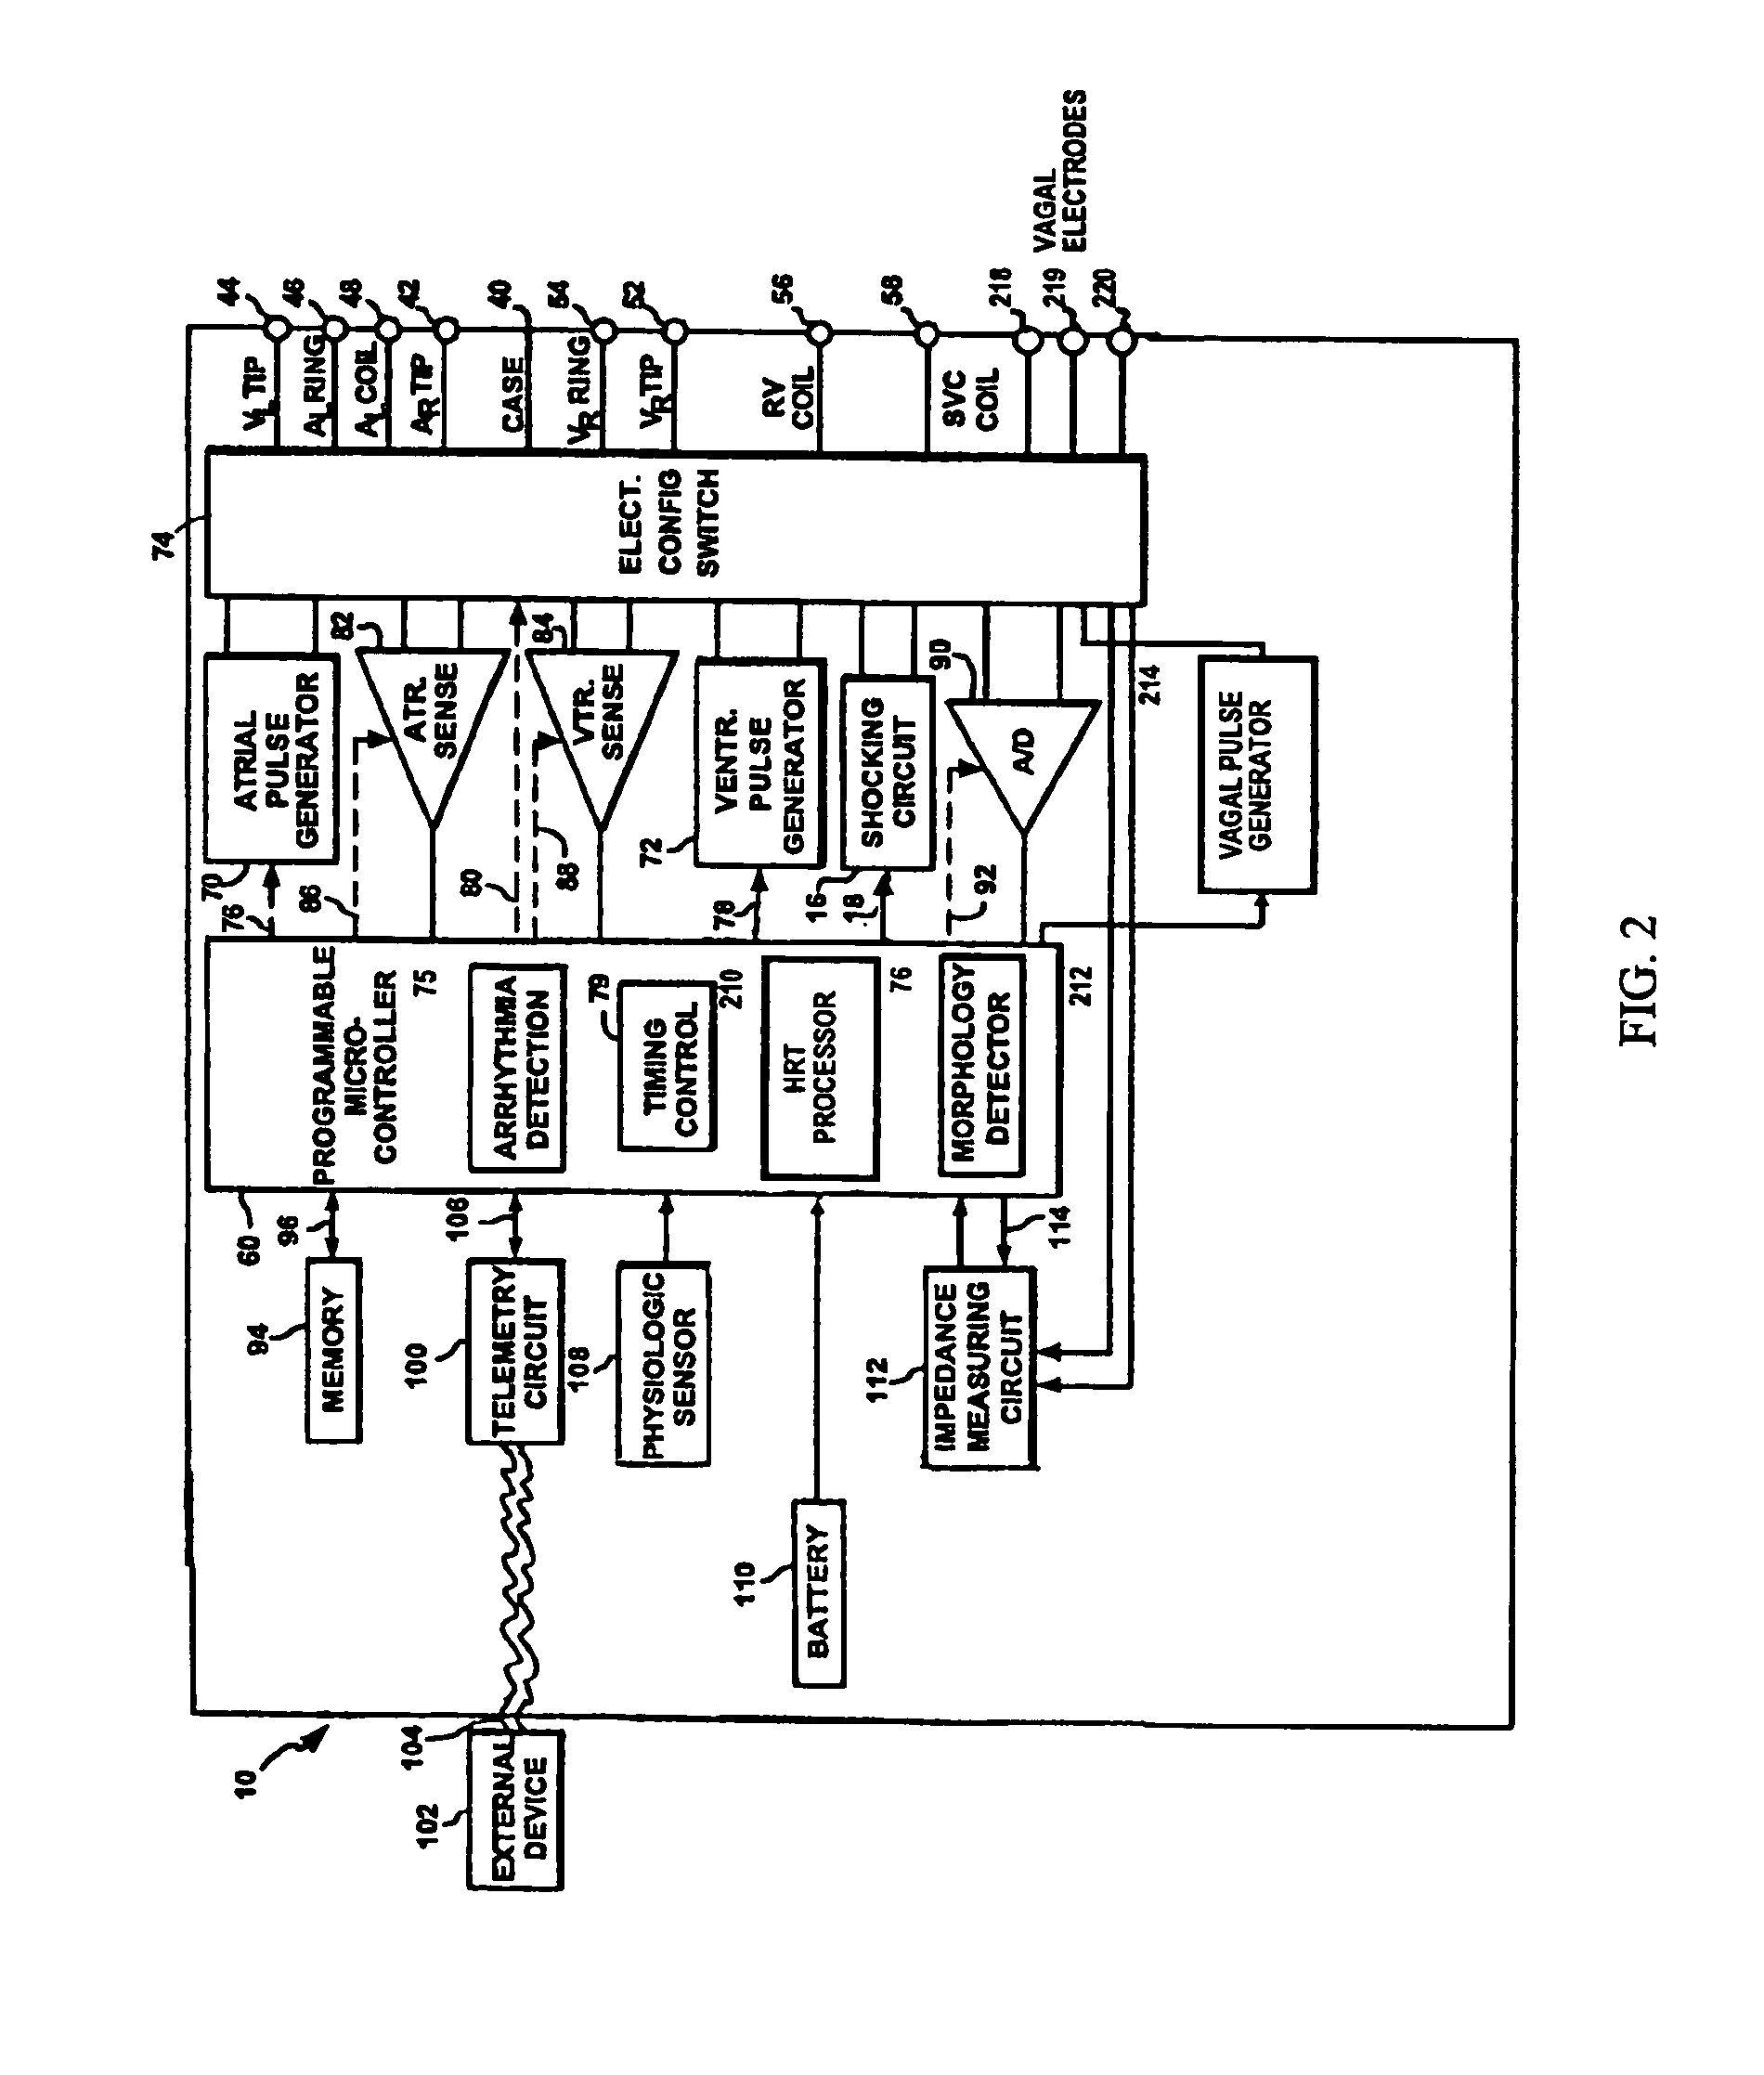 System and method of using vagal stimulation to assess autonomic tone and risk of sudden cardiac death in an implantable cardiac device